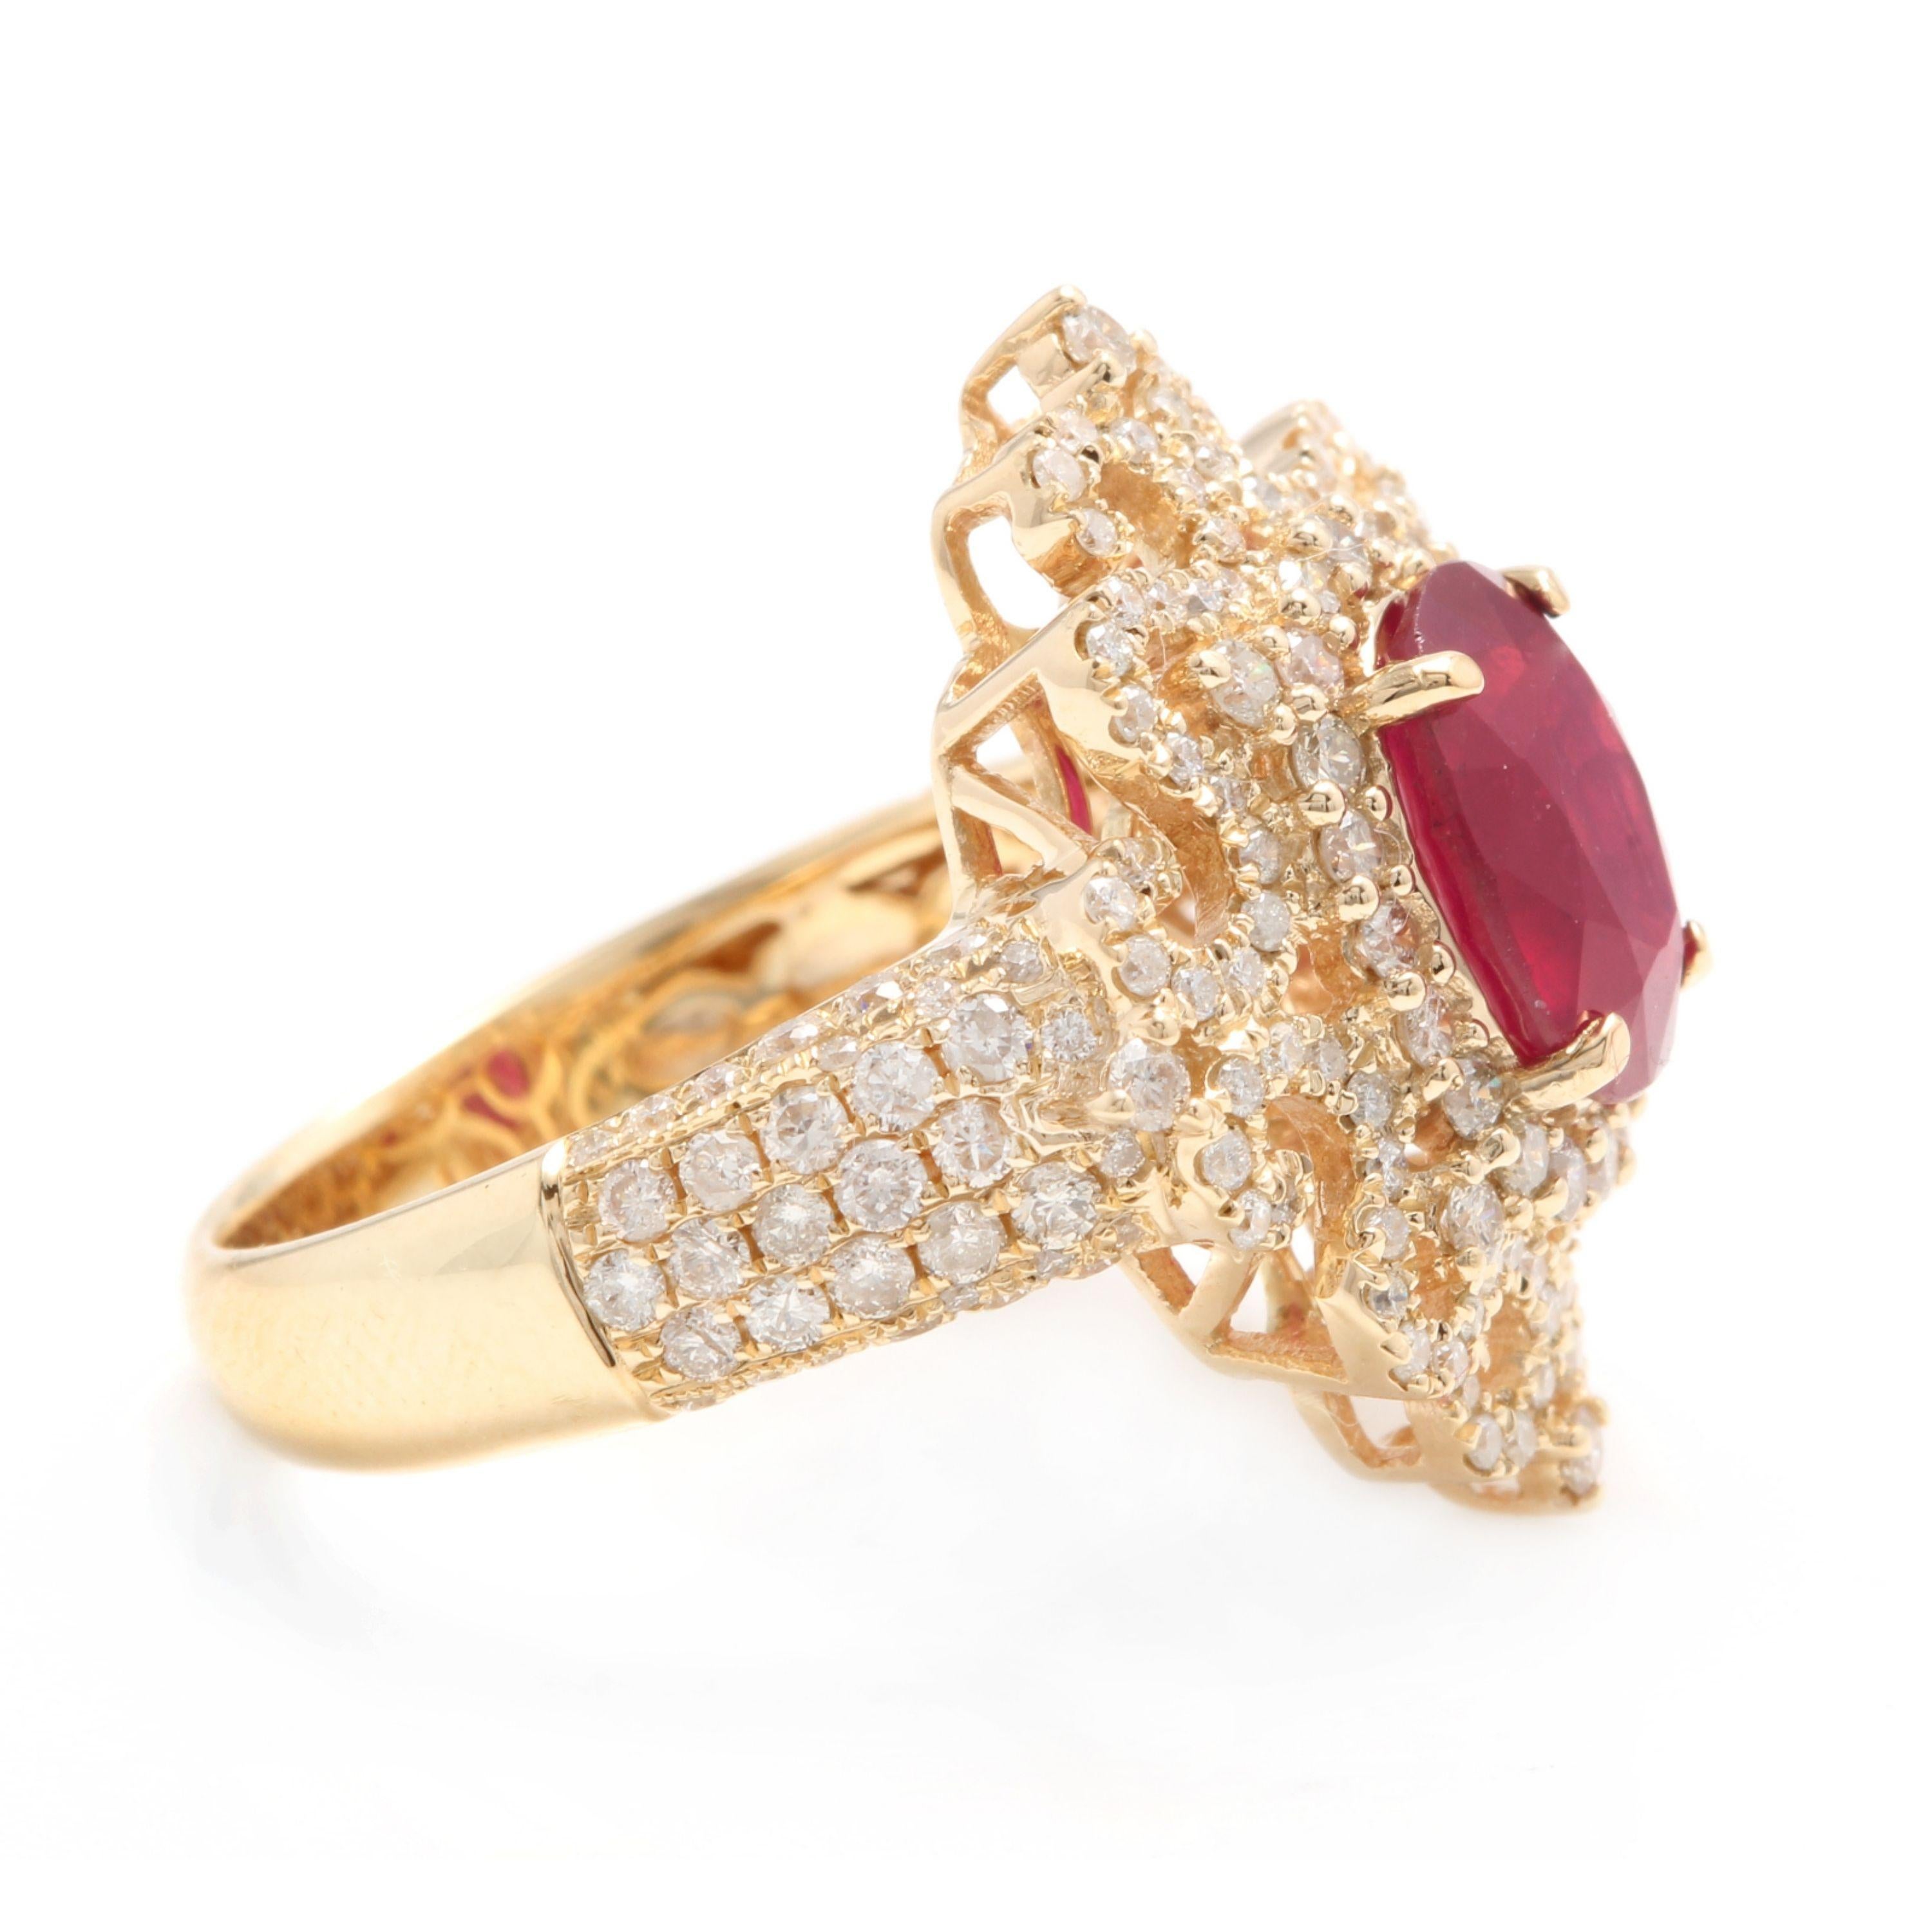 4.50 Carats Impressive Red Ruby and Natural Diamond 14K Solid Yellow Gold Ring

Total Red Ruby Weight is Approx. 3.00 Carats (Treated: Lead Glass Filling)

Ruby Measures: Approx. 9.00 x 7.00mm

Natural Round Diamonds Weight: Approx. 1.50 Carats